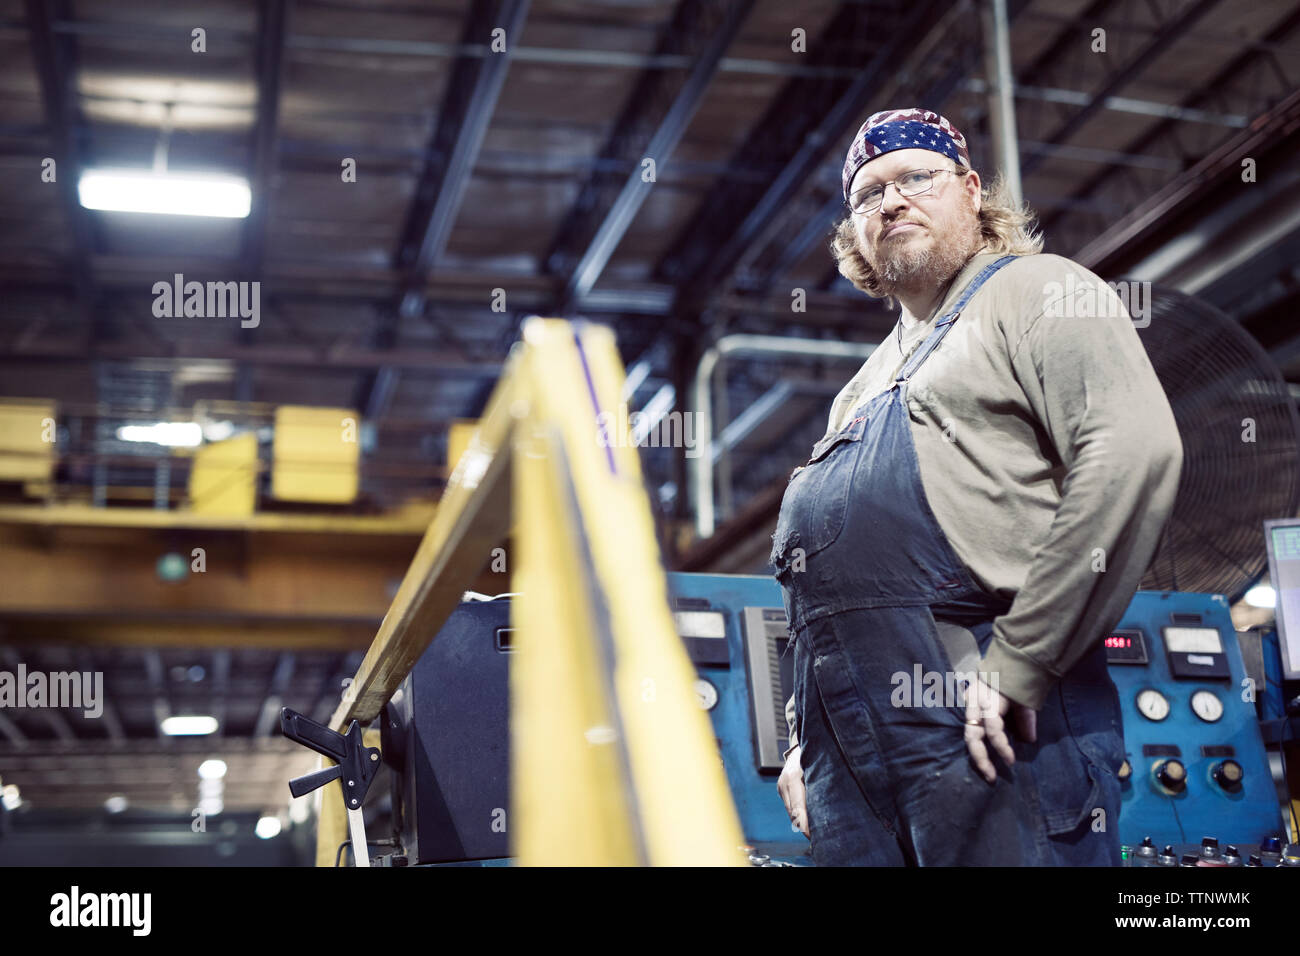 Low angle view of blue collar worker wearing bib overalls and headscarf while working in steel industry Stock Photo